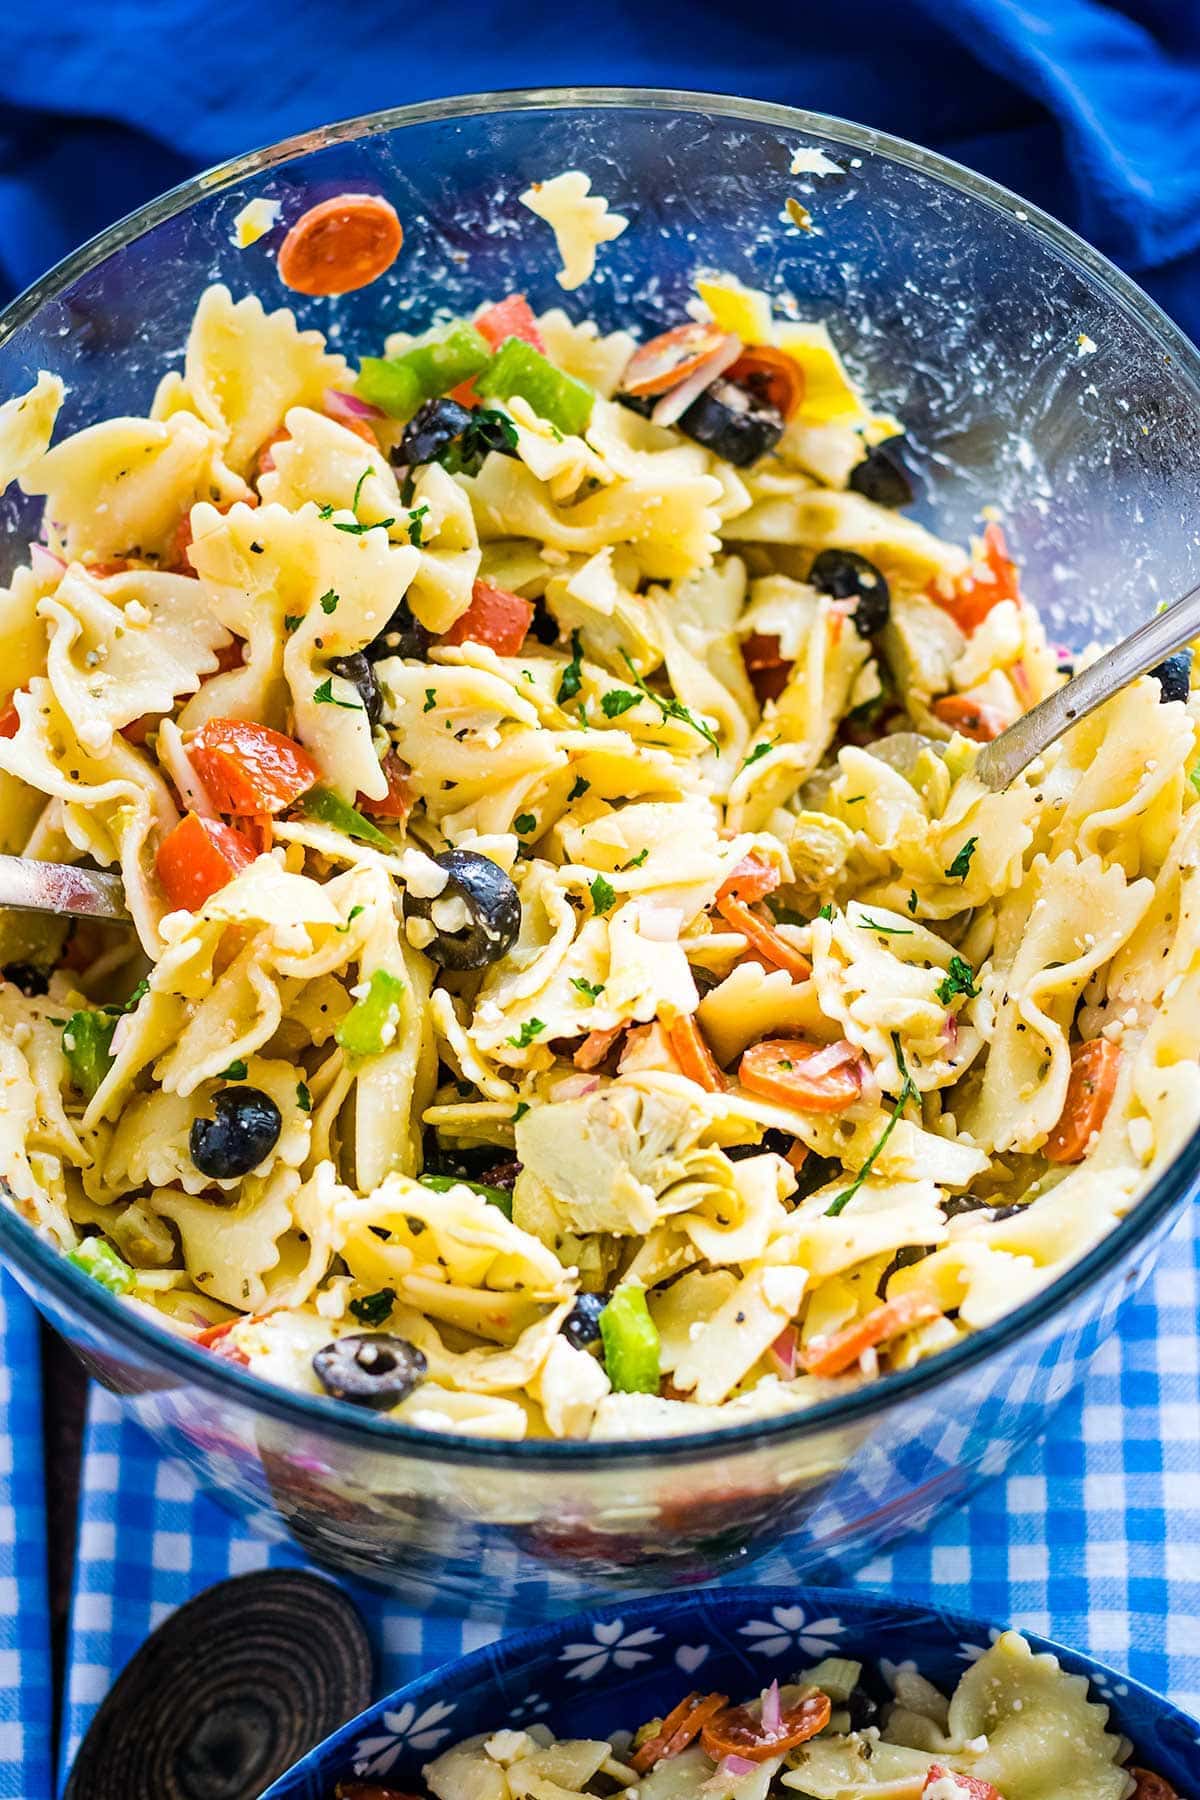 Artichoke and feta tossed pasta salad in a clear glass servign bowl